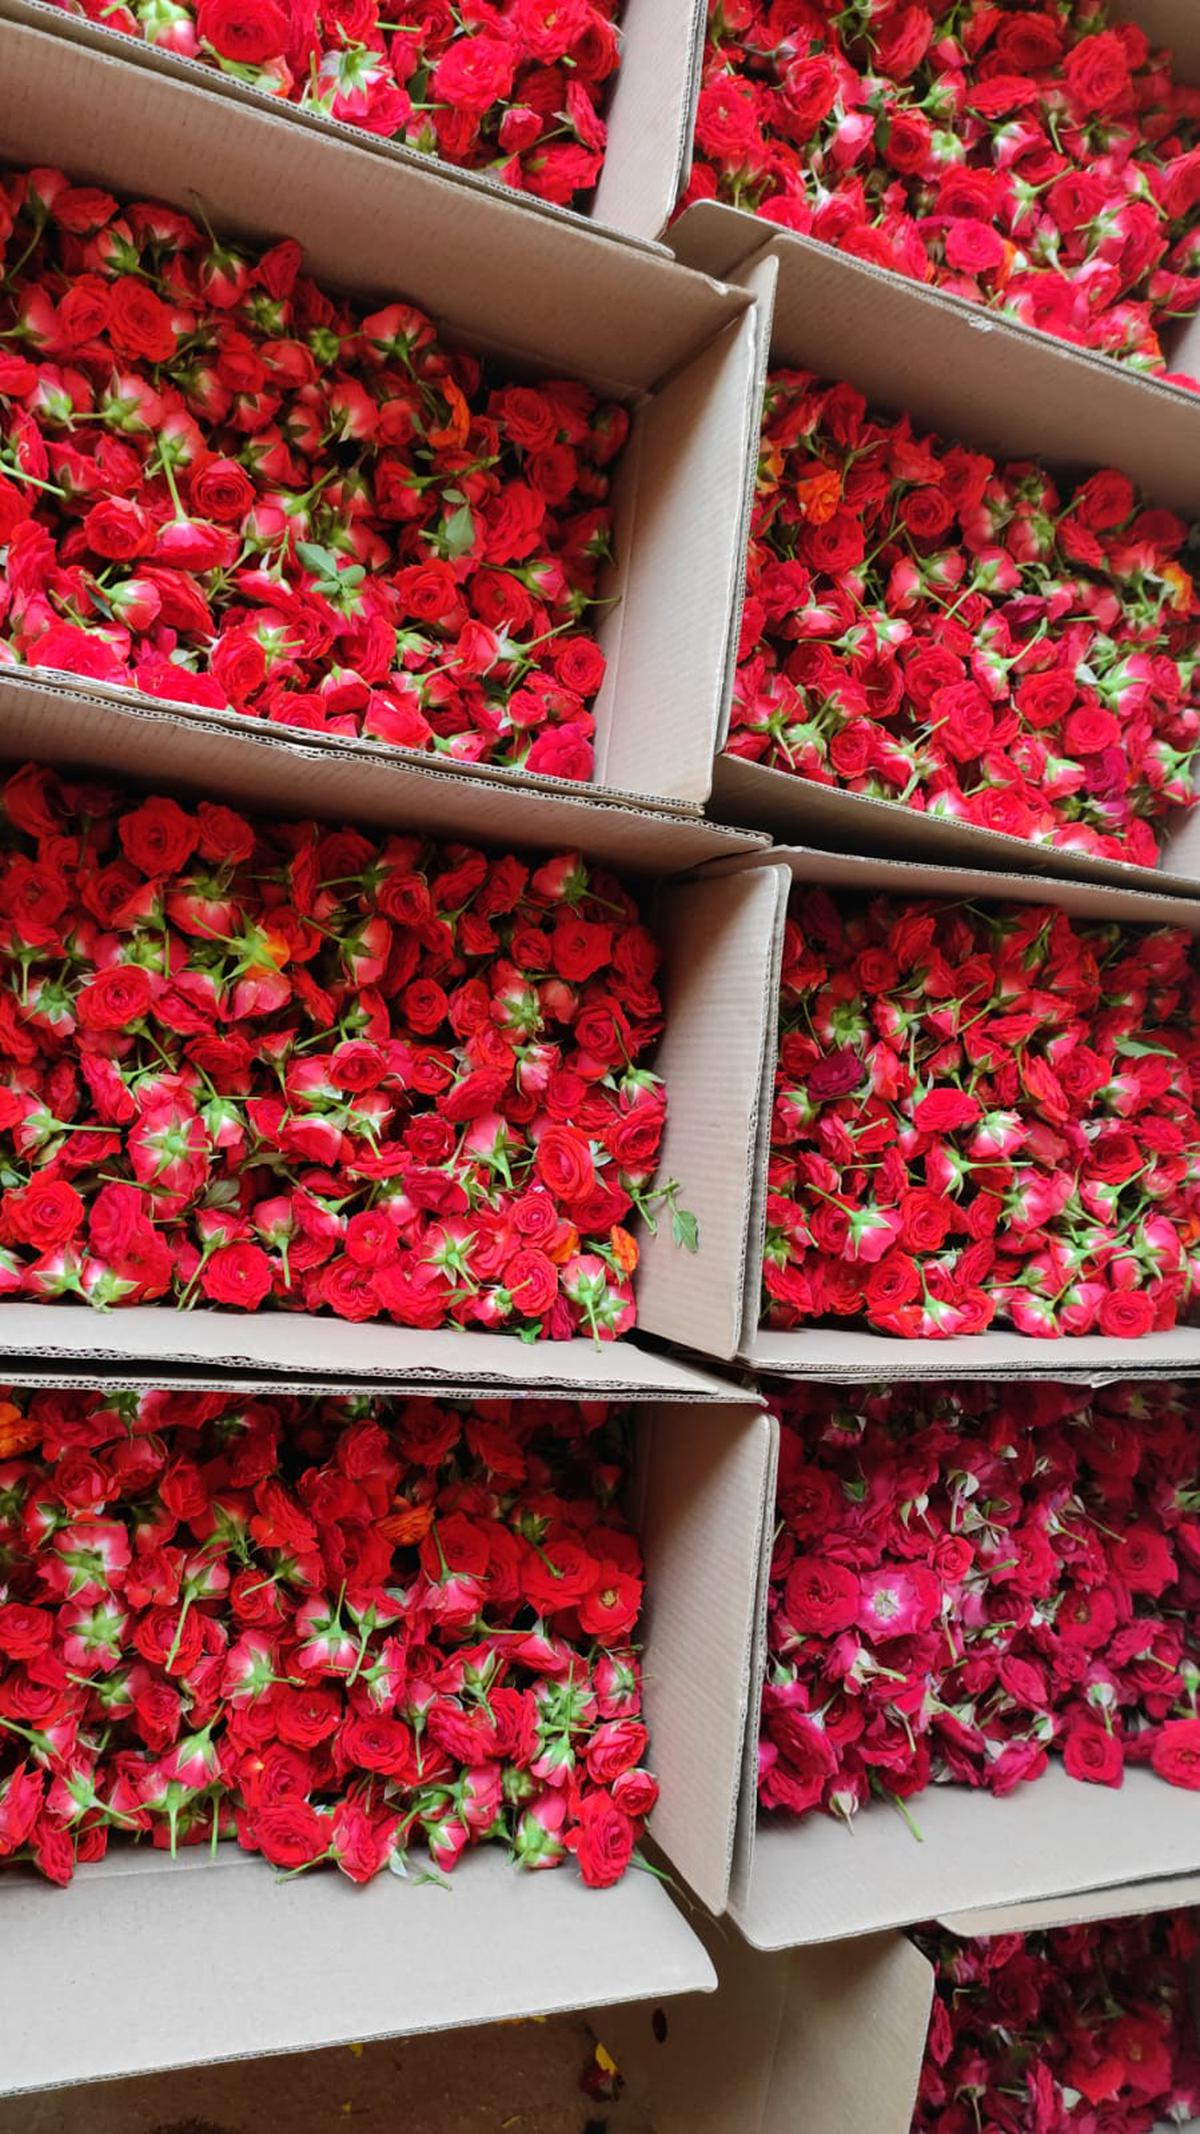 Roses ready to be shipped